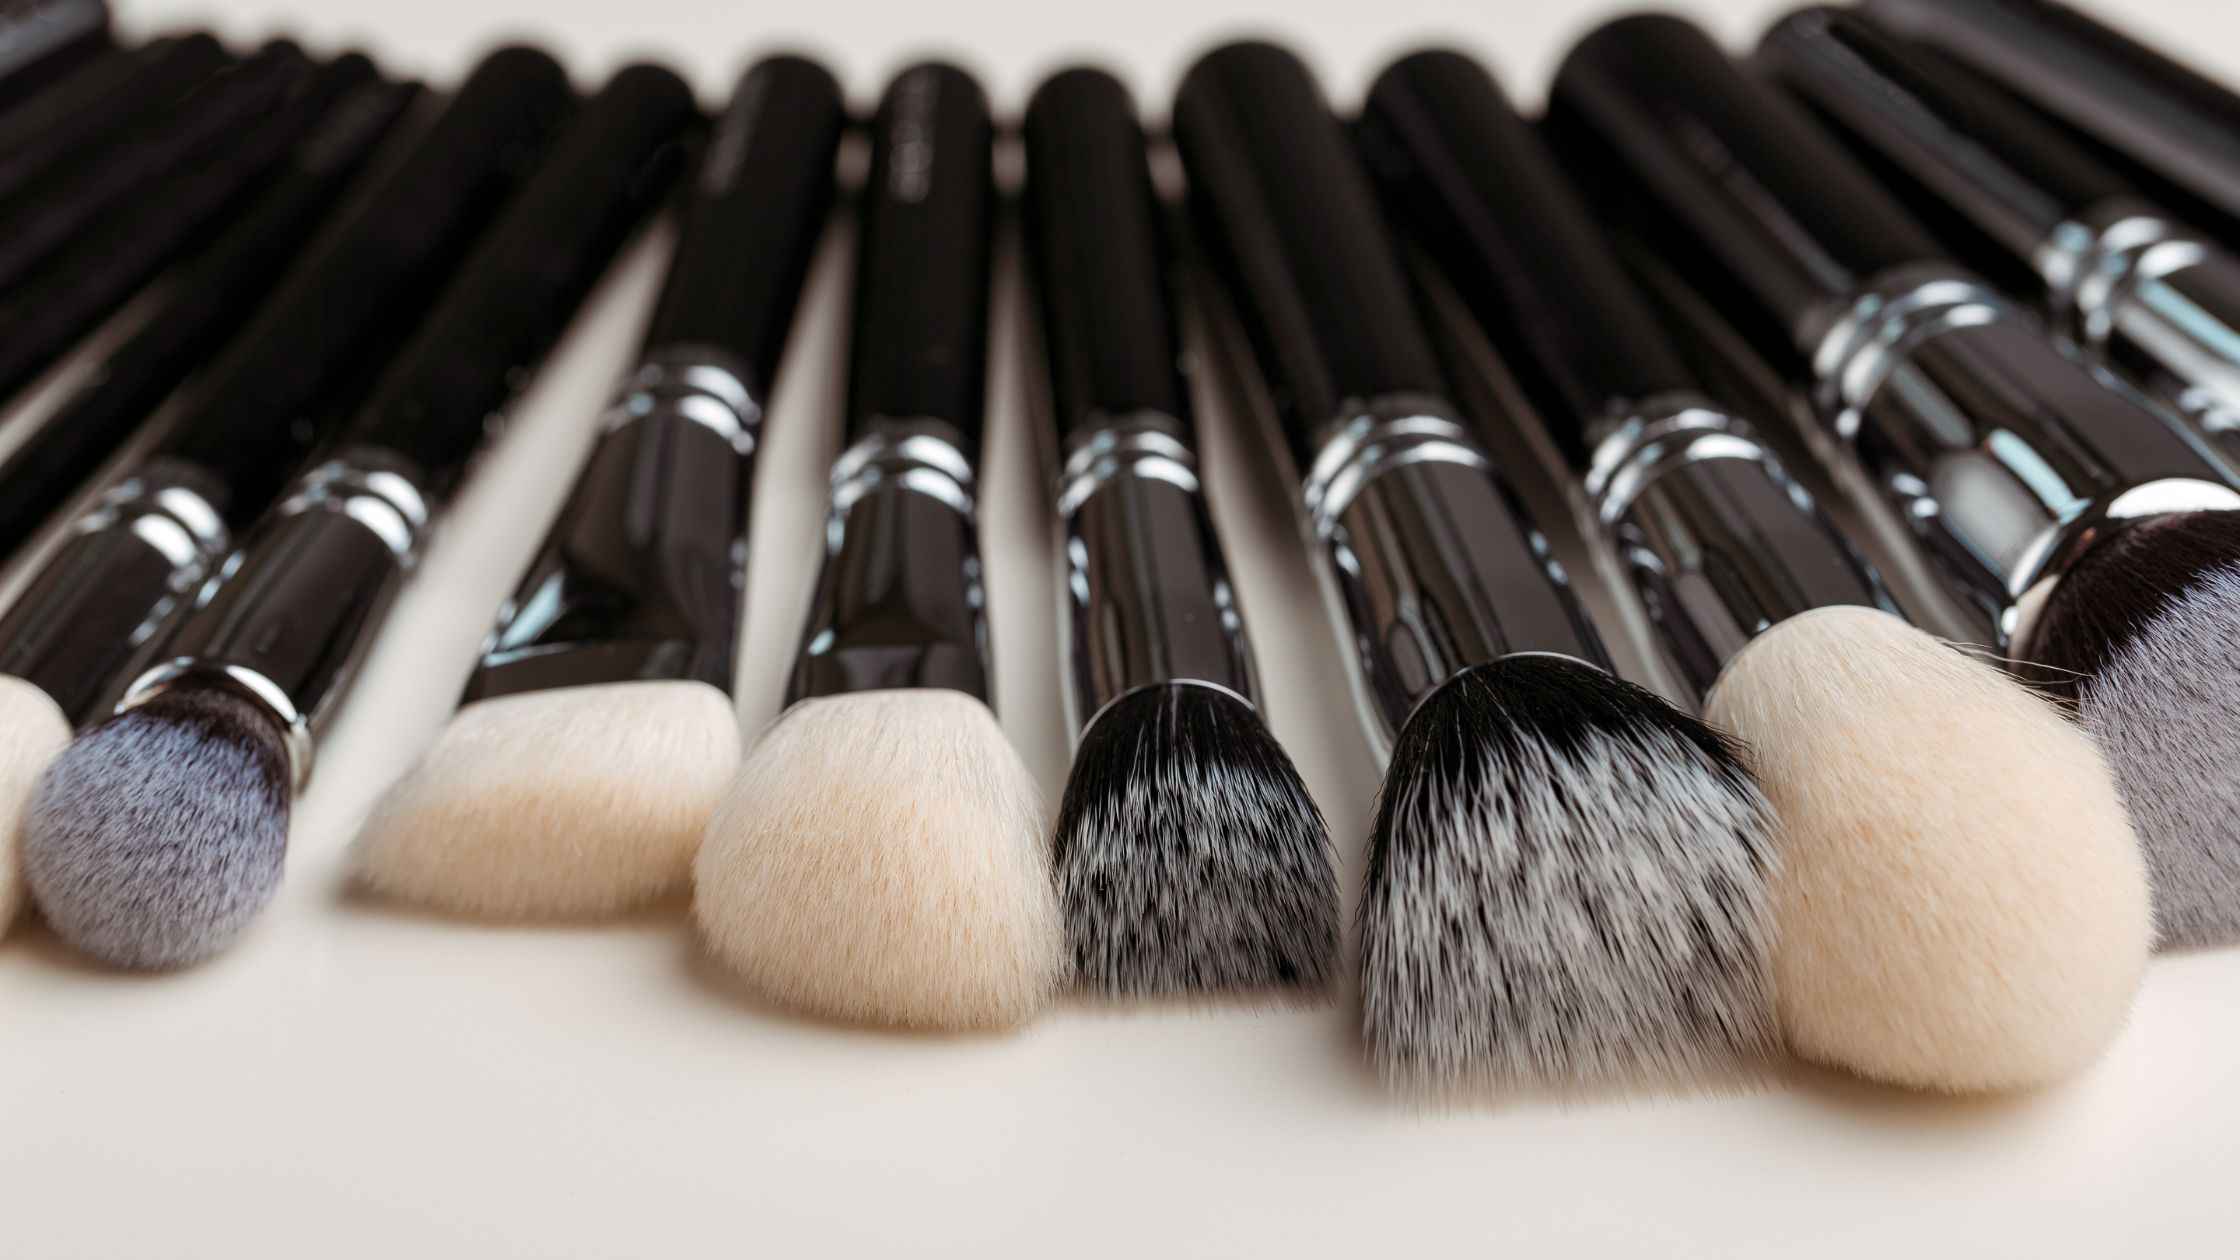 Top 10 Makeup Brush Manufacturers for High-Quality Brushes